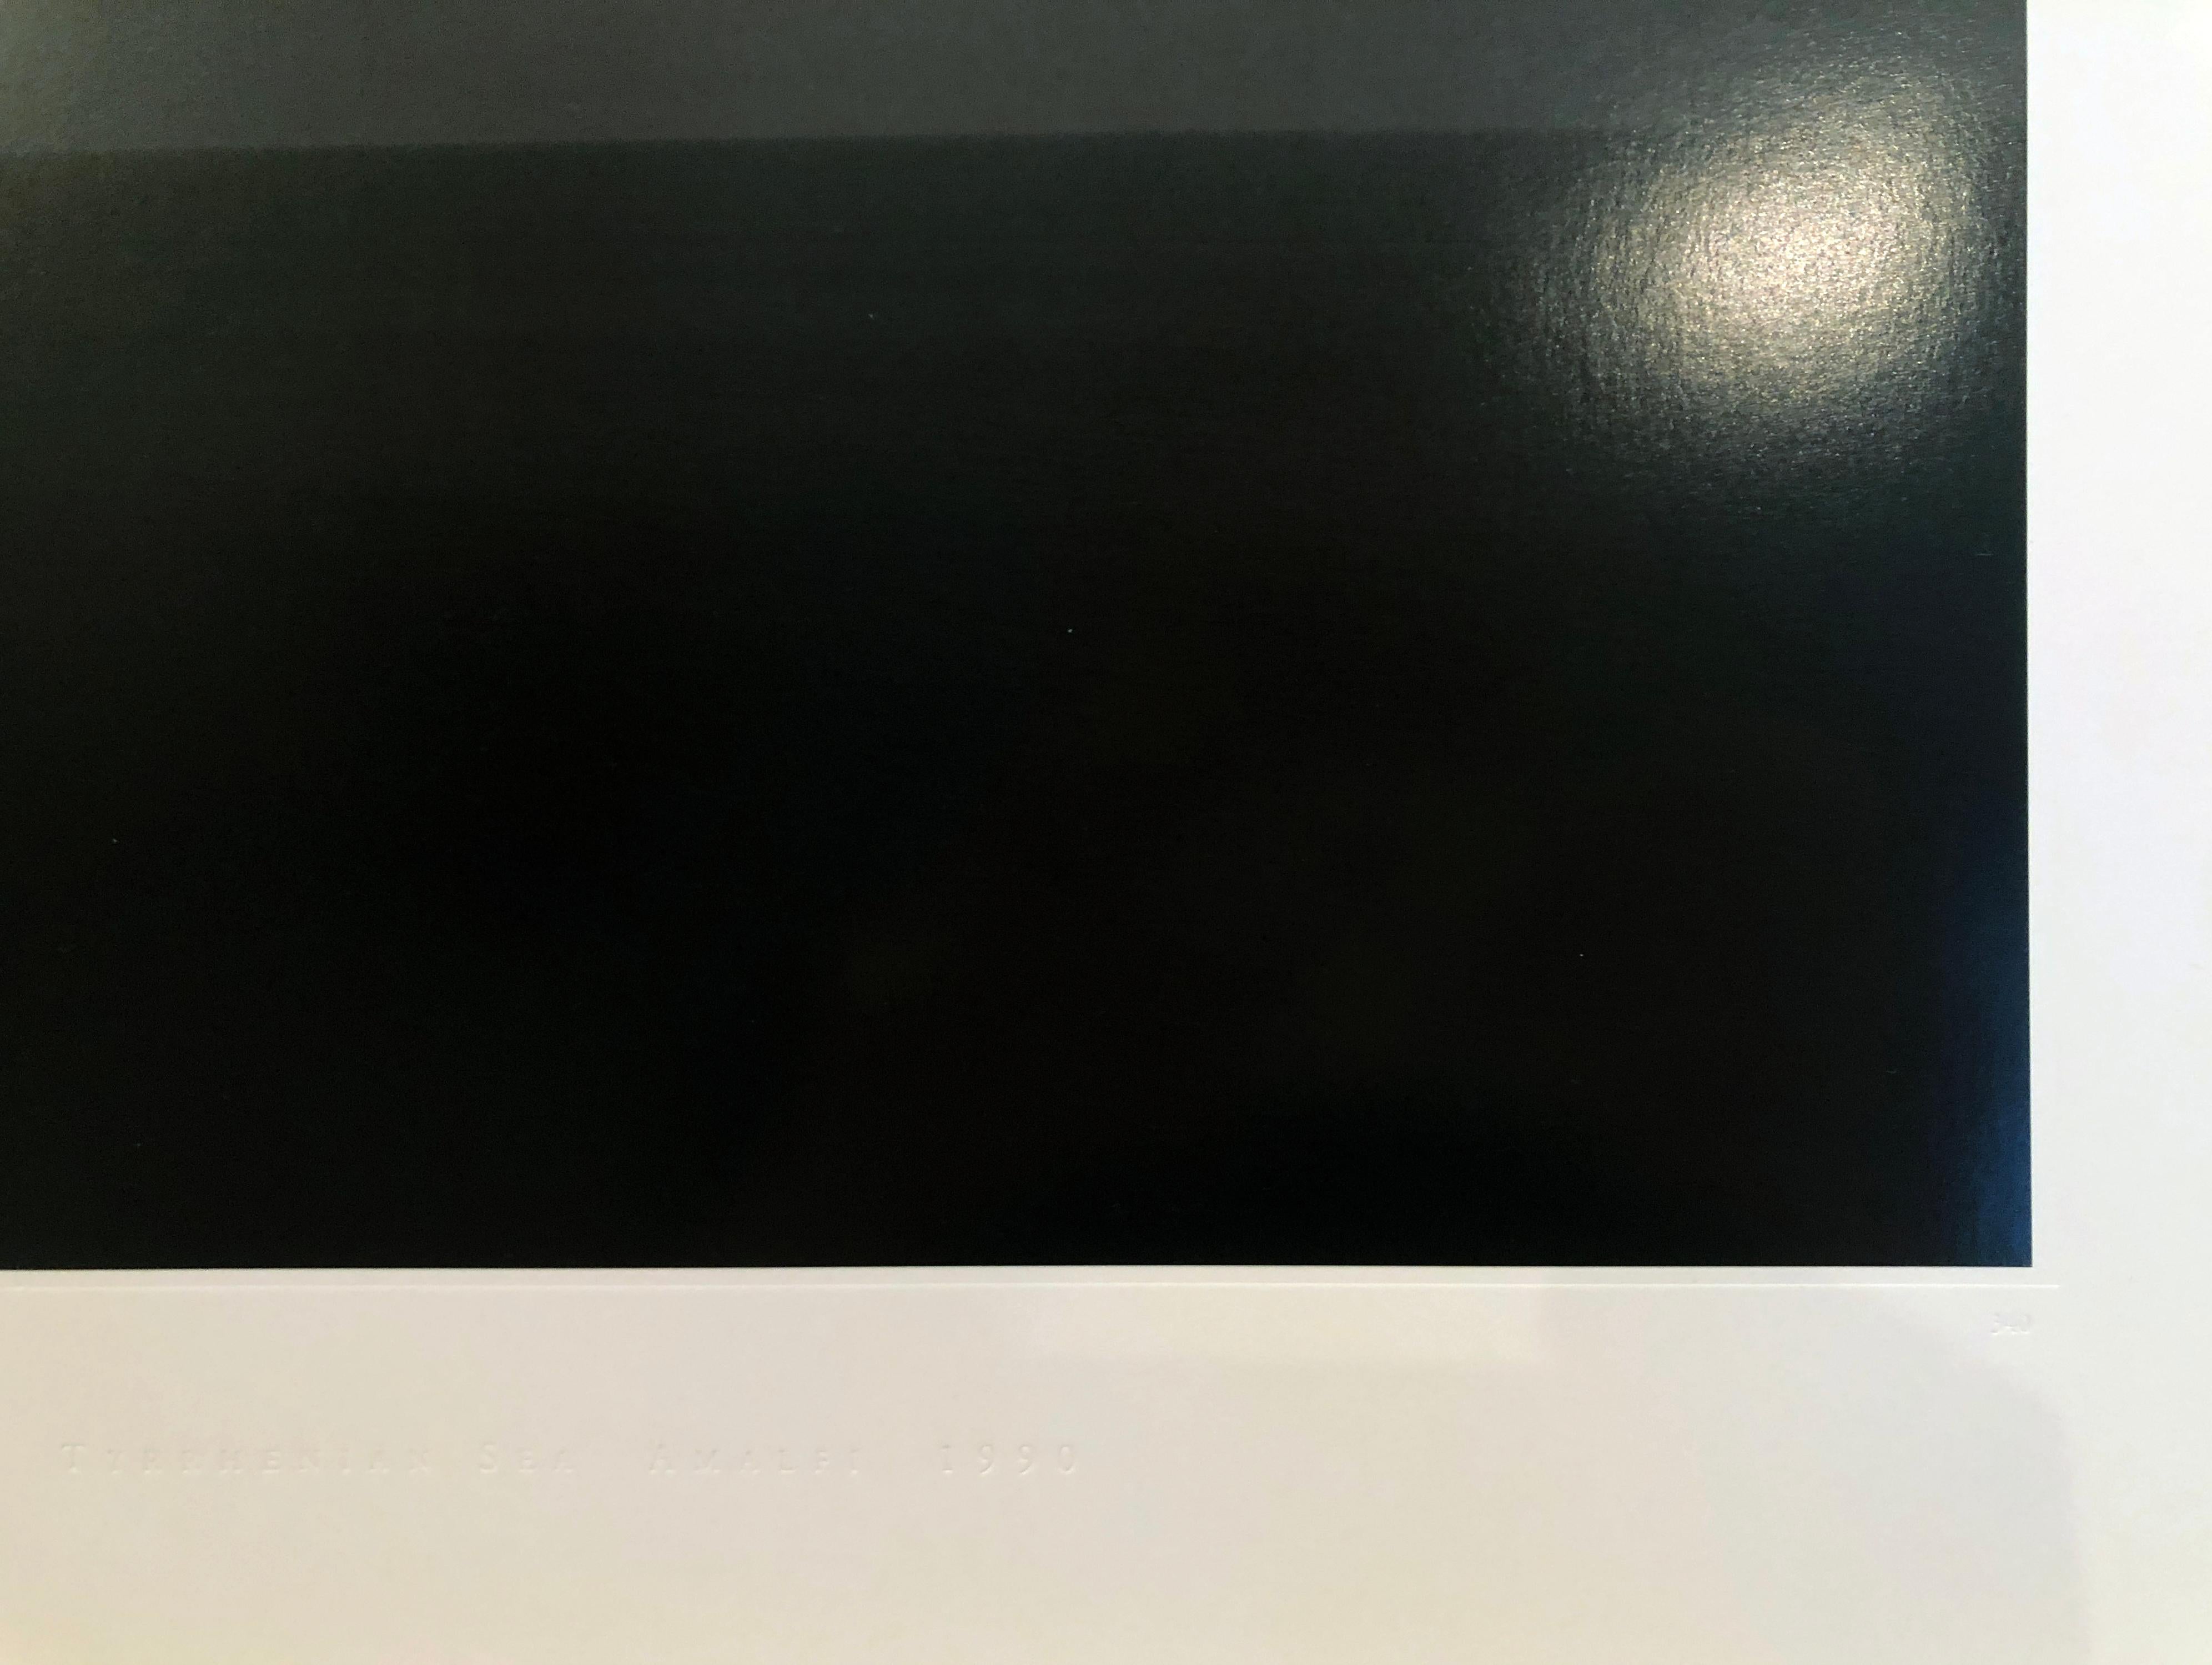 Hiroshi Sugimoto, Time Exposed 340, Lithograph, 1991; photographic seascape 2